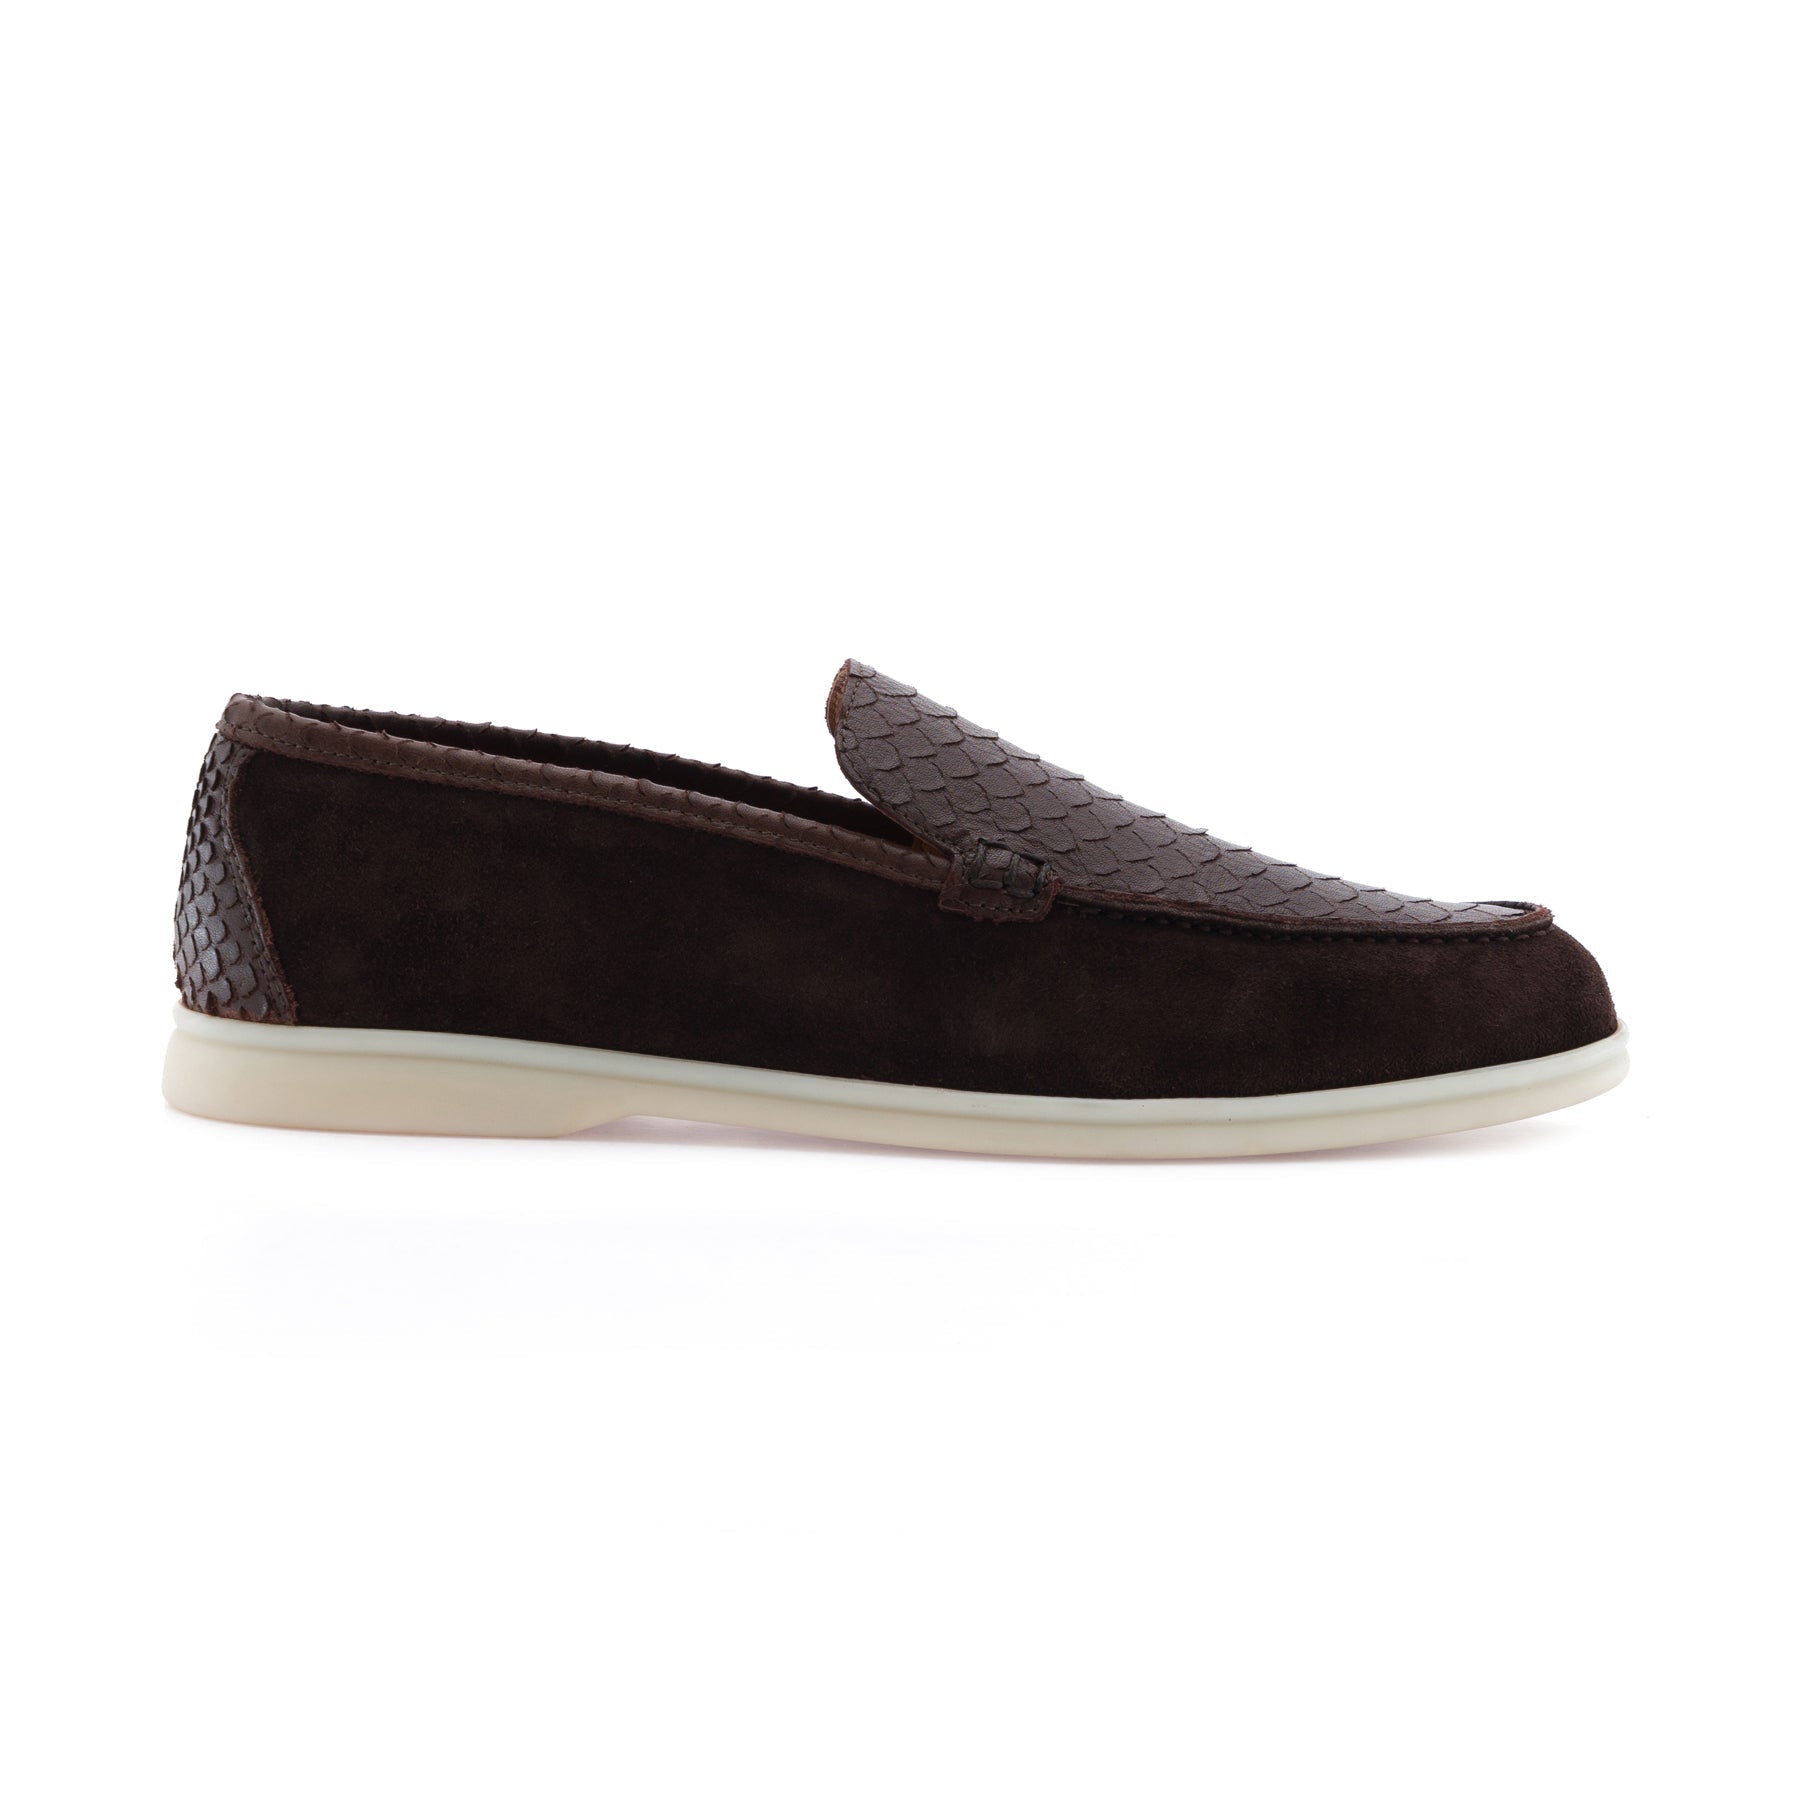 Timothy Brown Suede Loafer